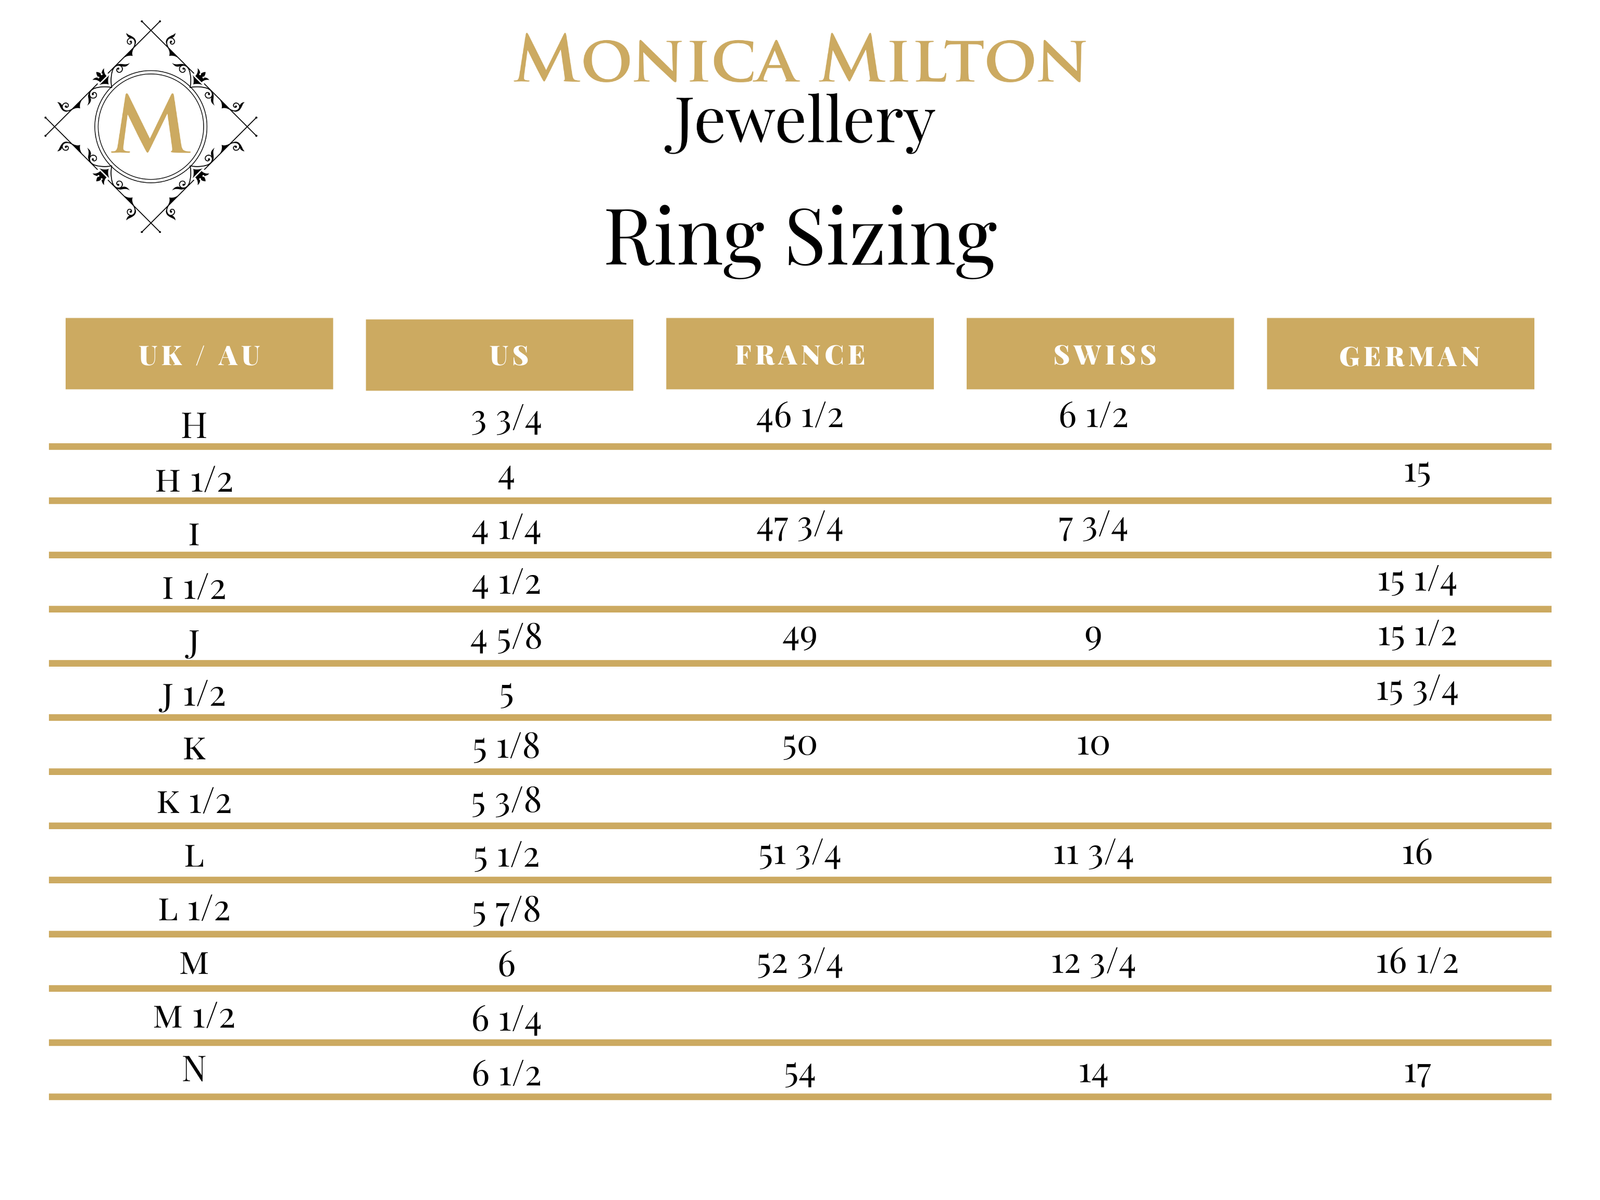 Ring sizing guide